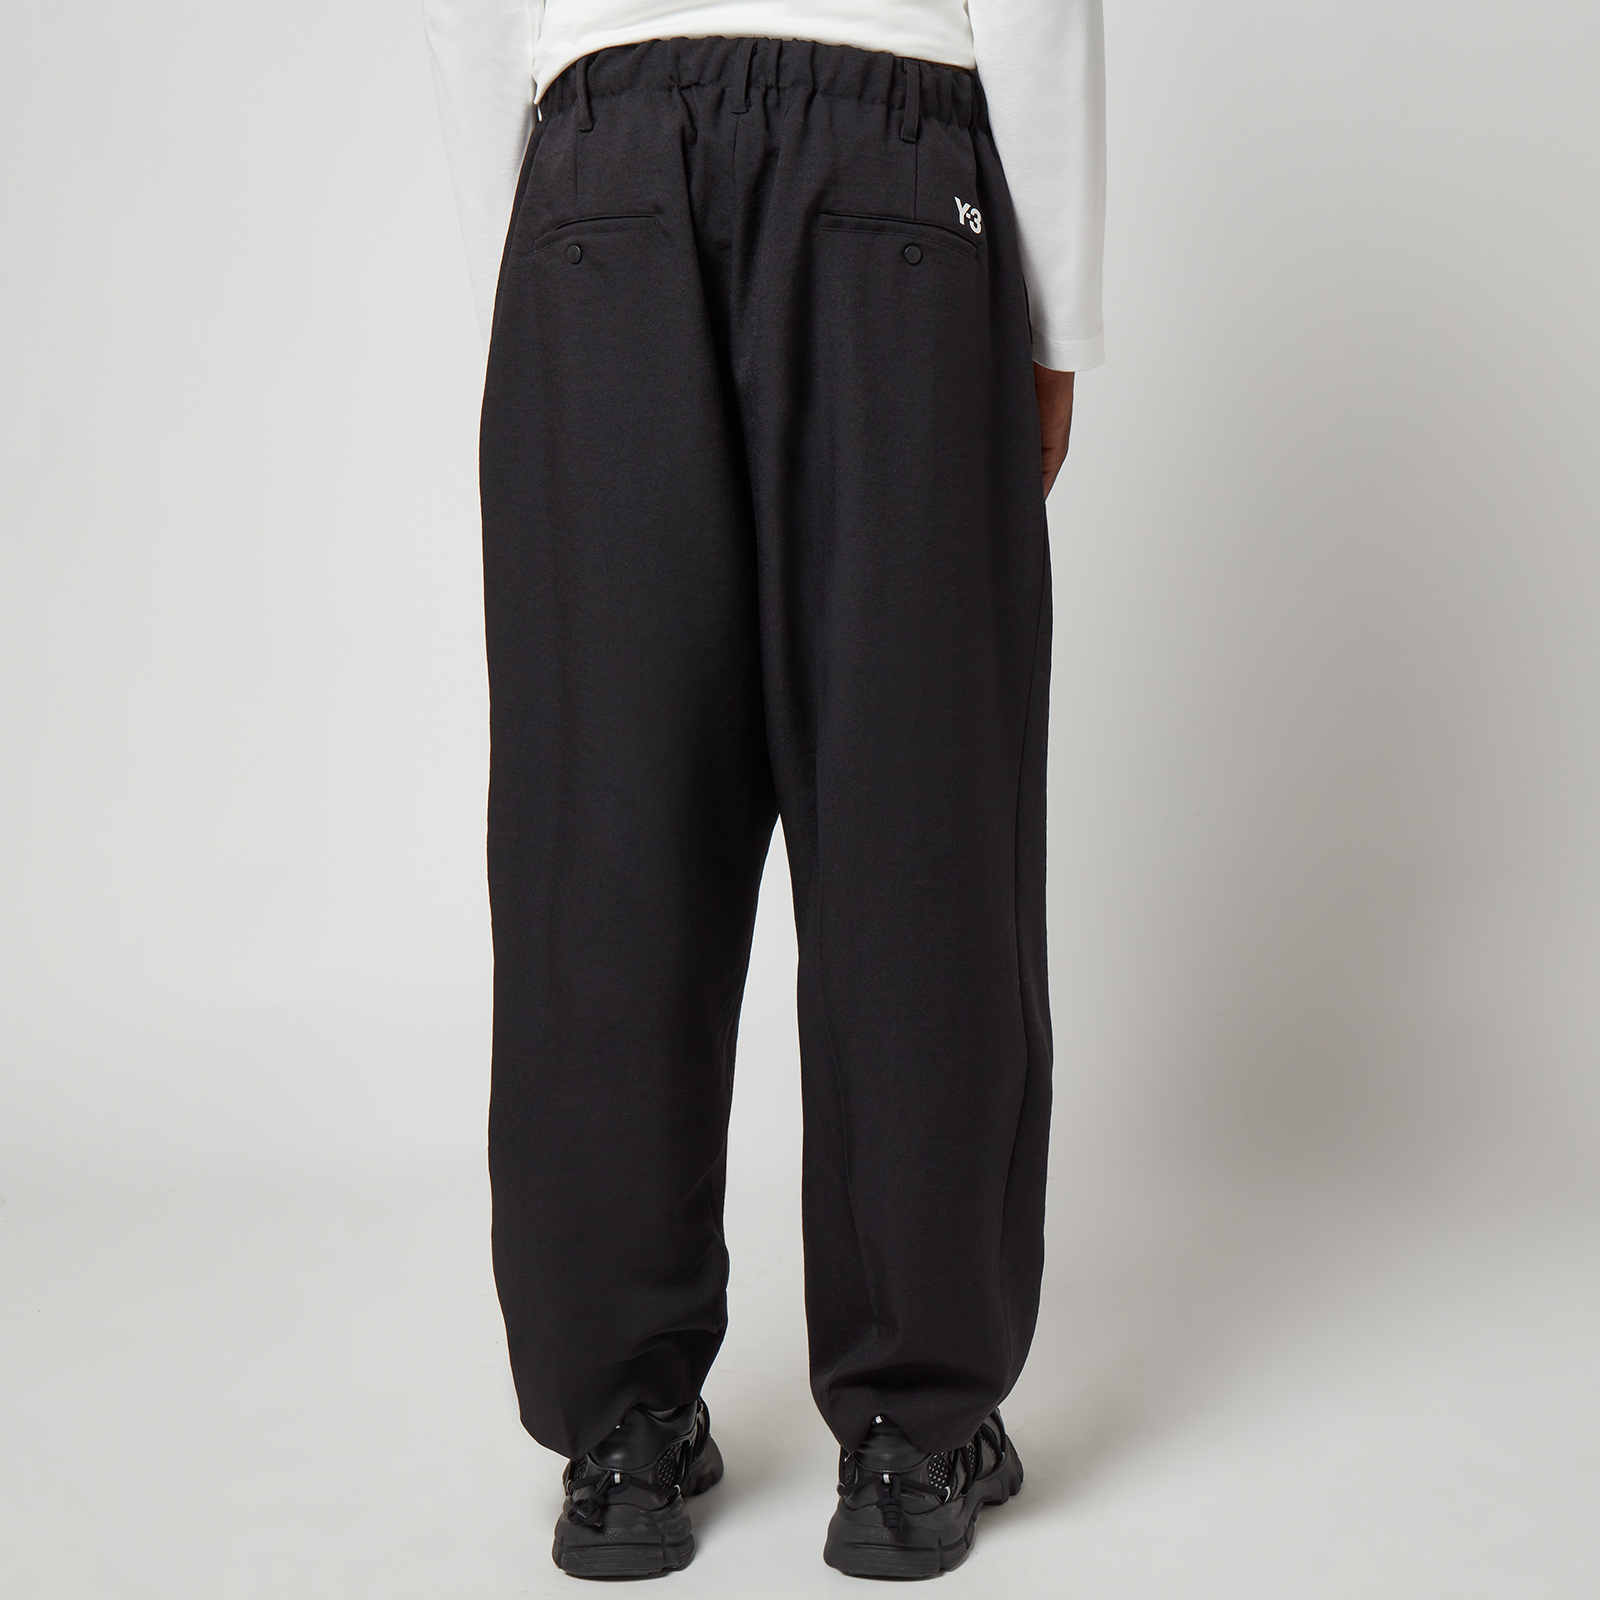 Y-3 18AW 3-Stripe Snap Pants - その他